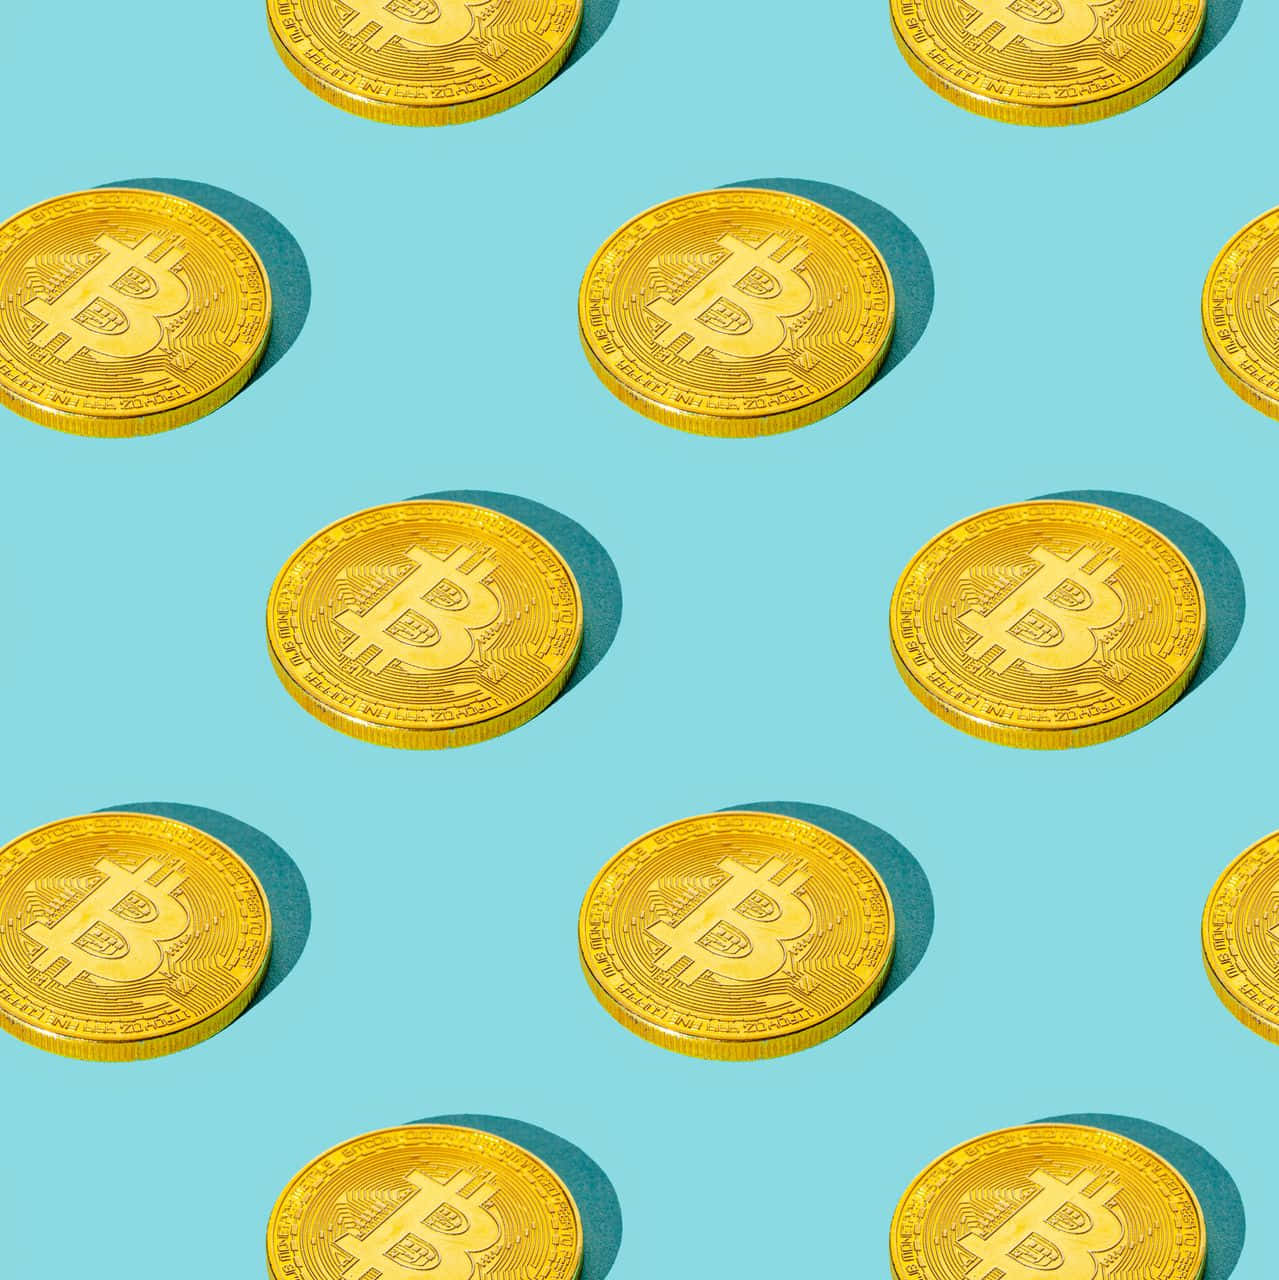 A Pattern Of Gold Bitcoin Coins On A Blue Background